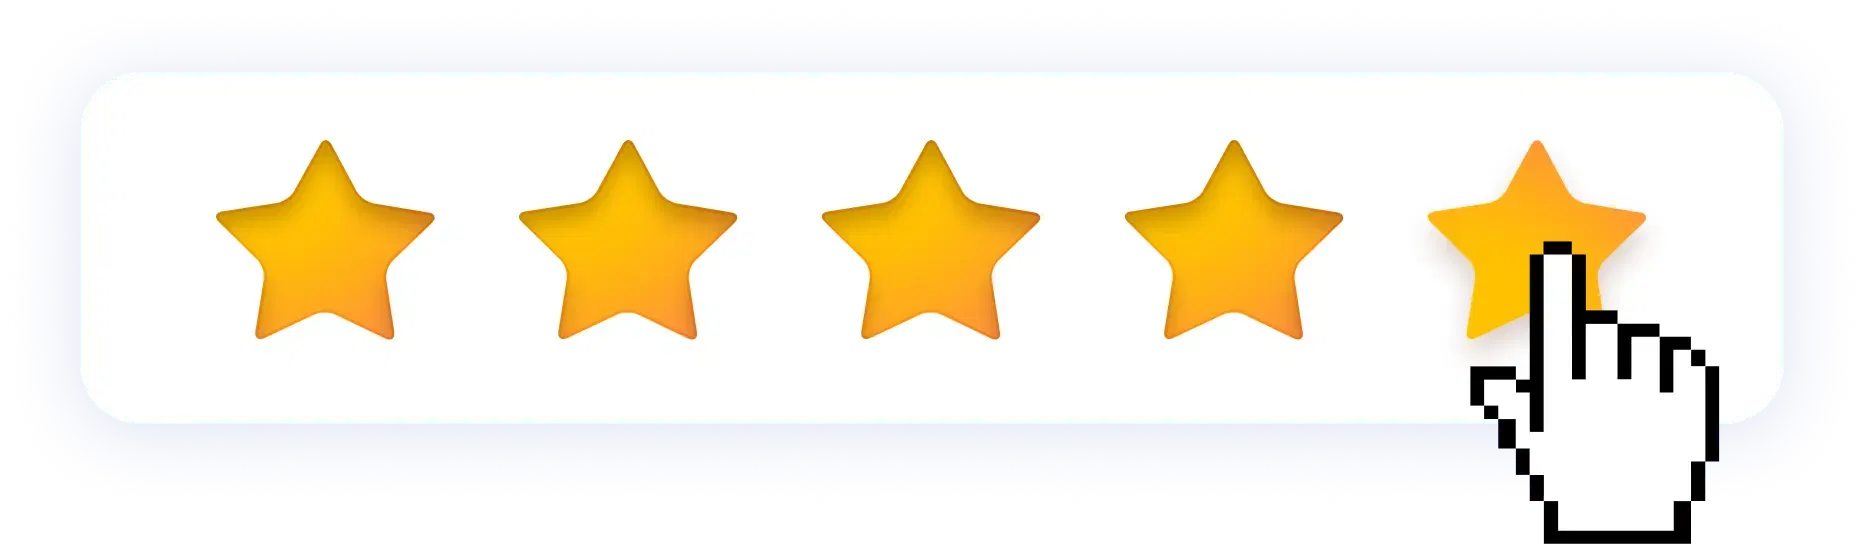 Stars review